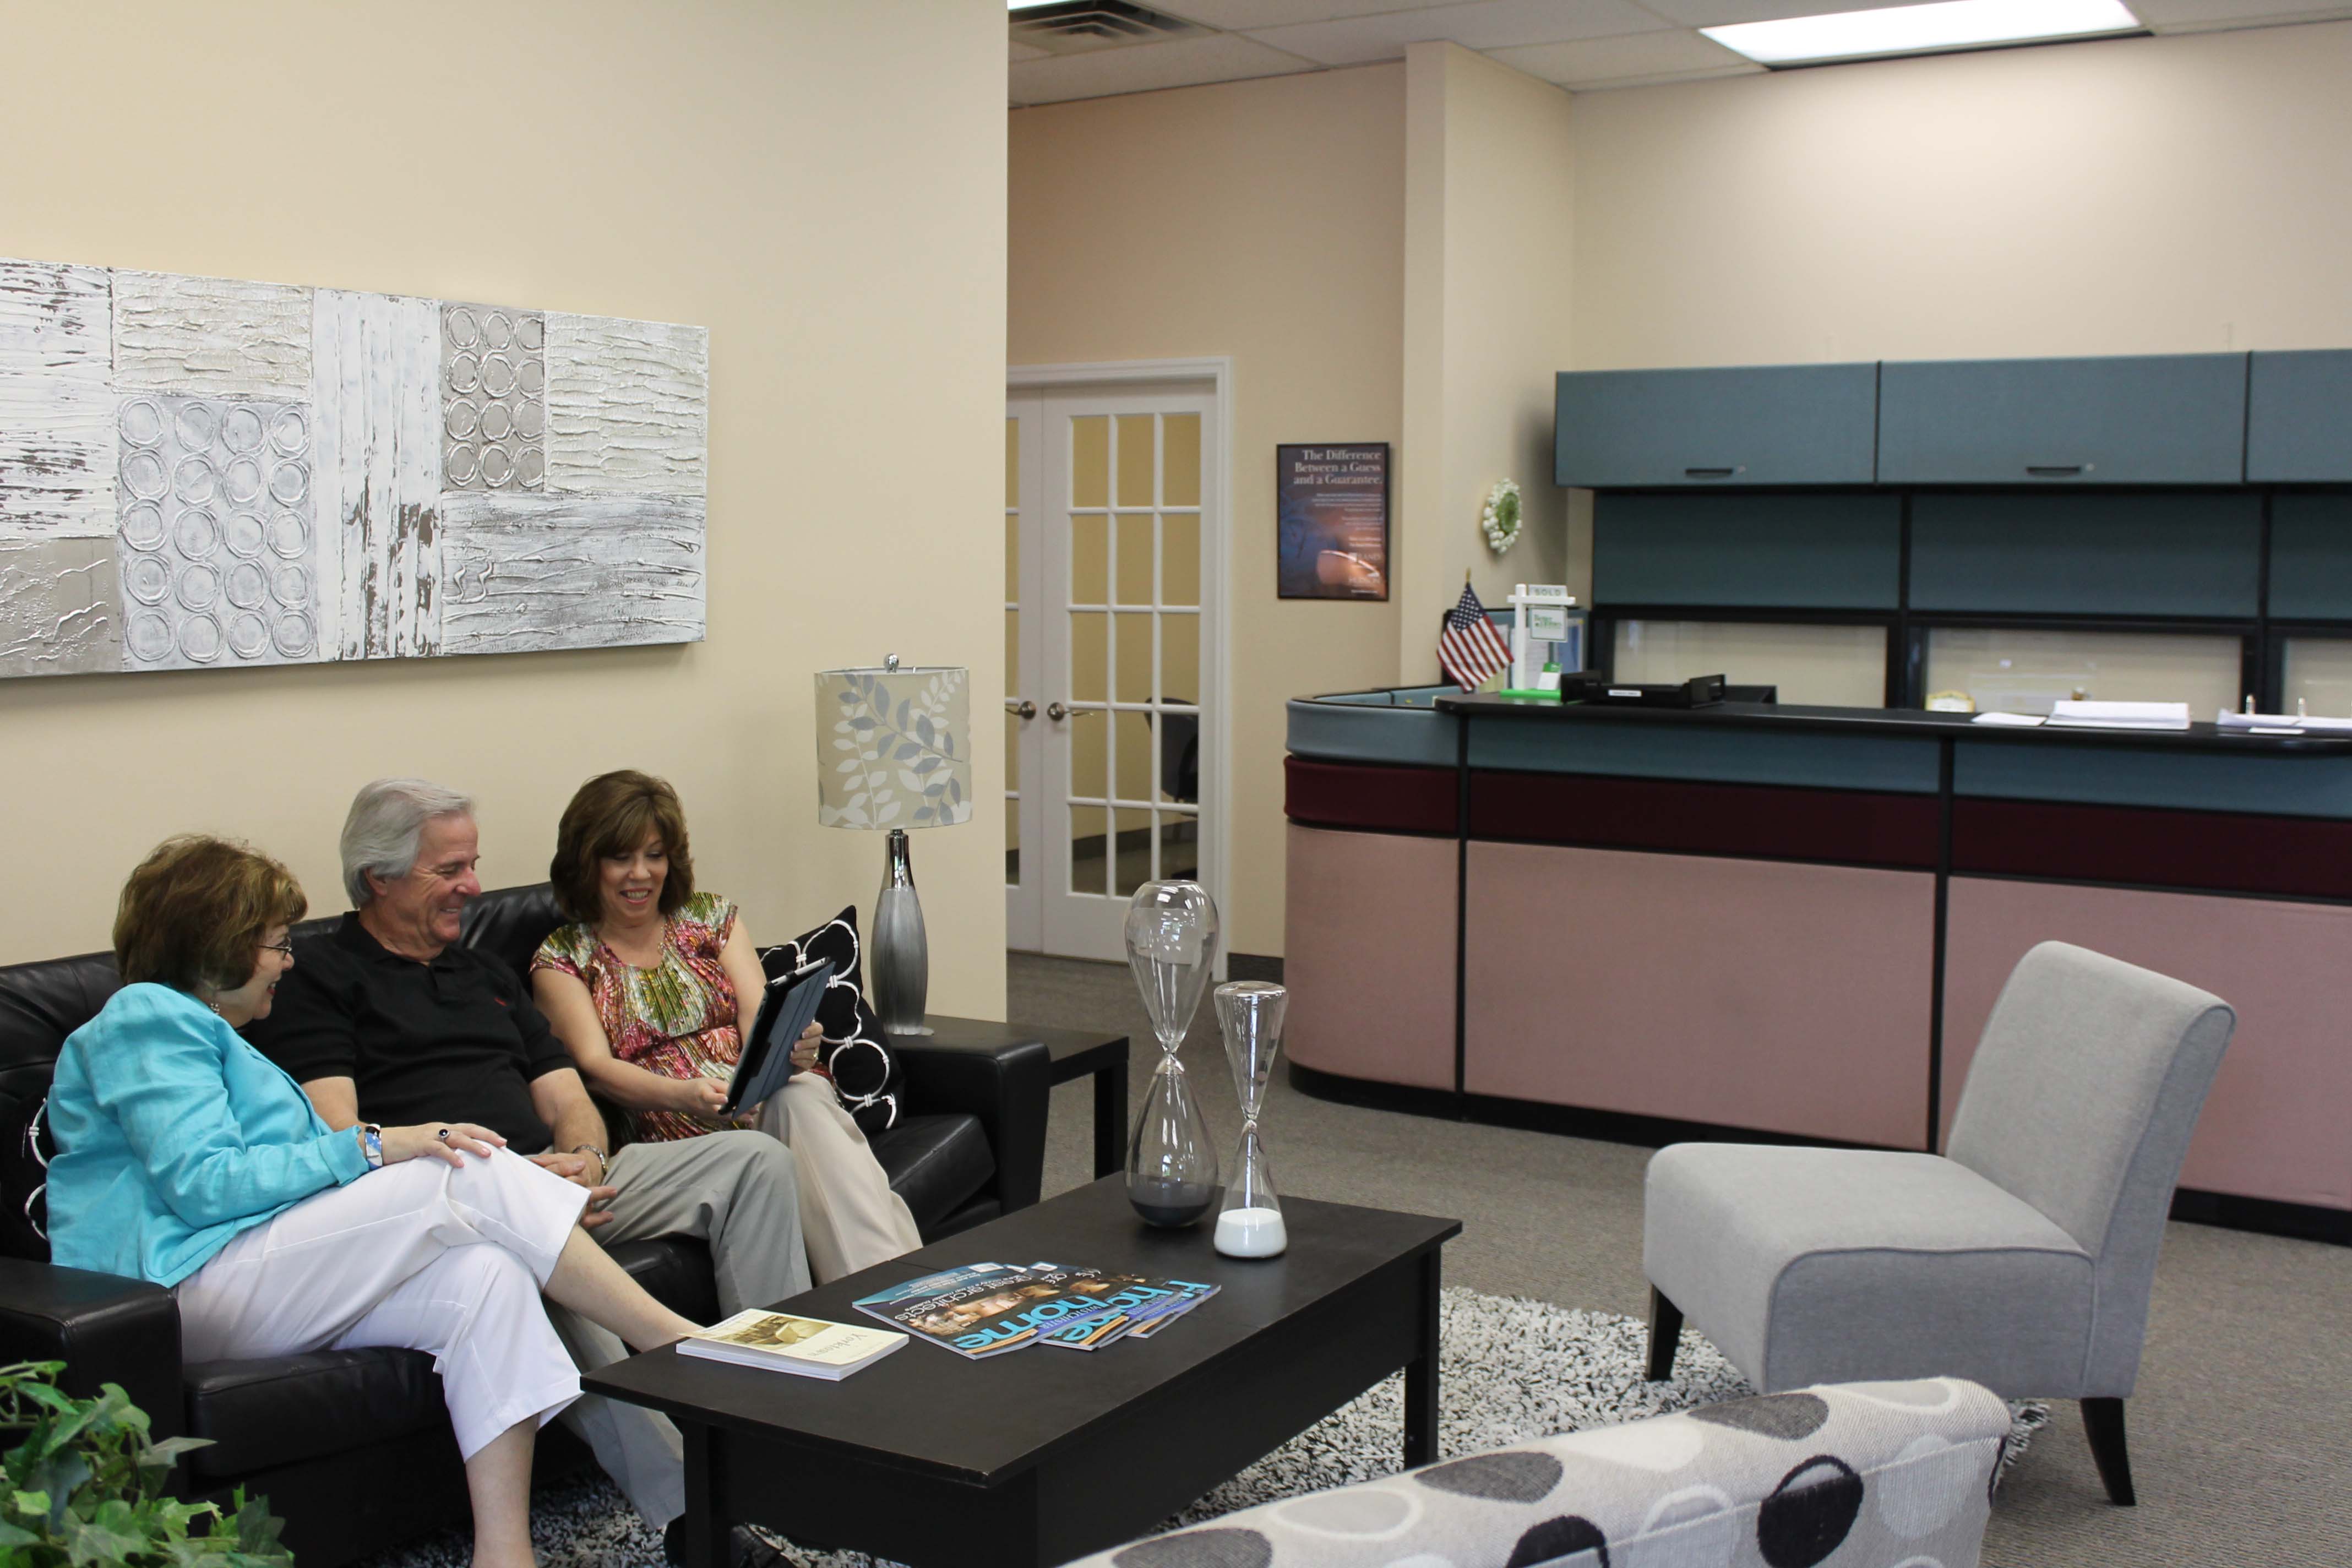 Diane and Bob Arenholz with Susan Labate in the lounge area of the new office in Yorktown.